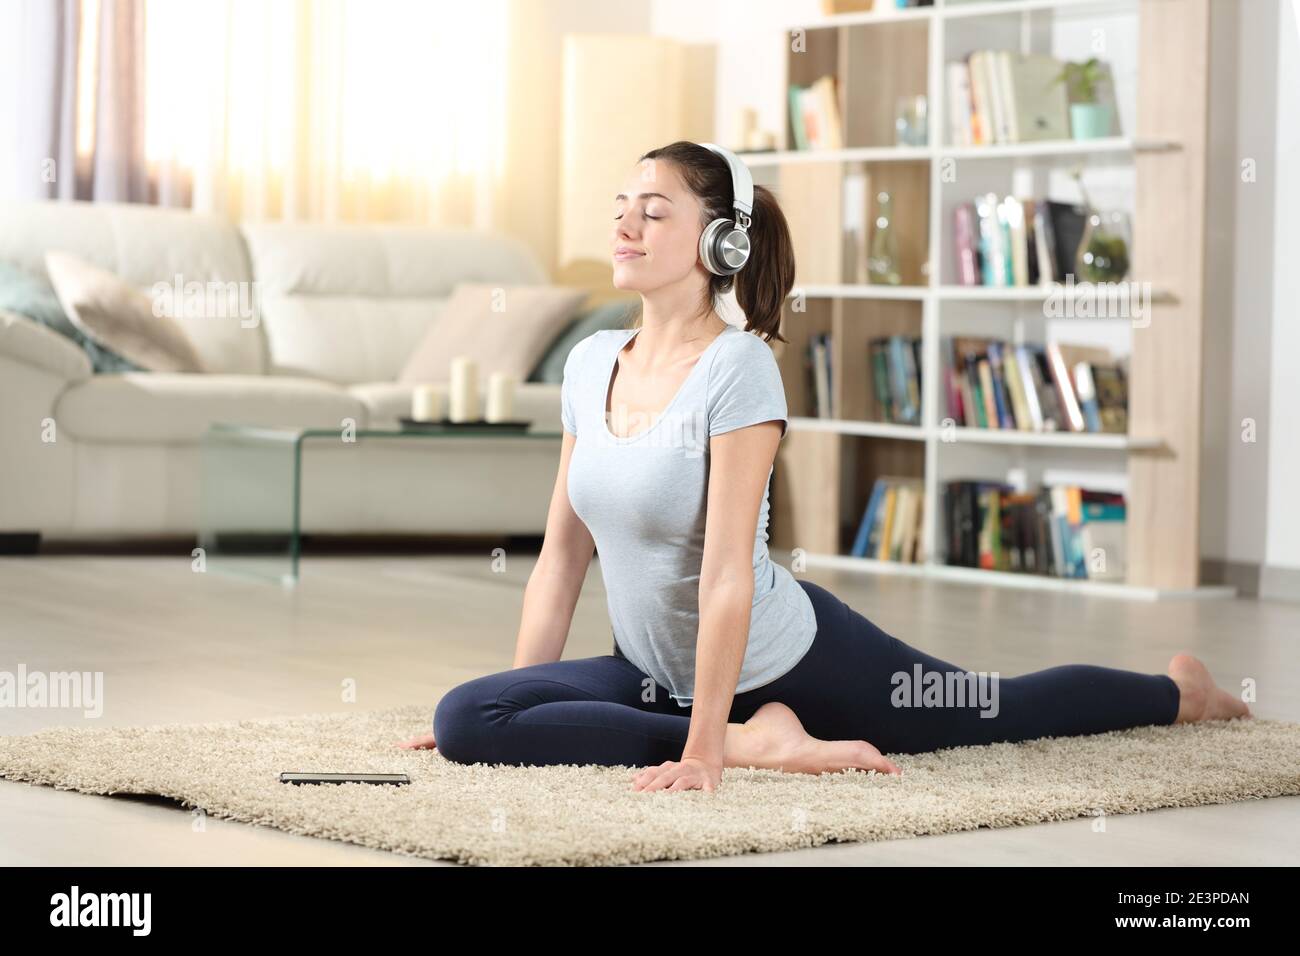 Concentrated woman doing yoga exercise listening audio tutorial with headphones at home Stock Photo